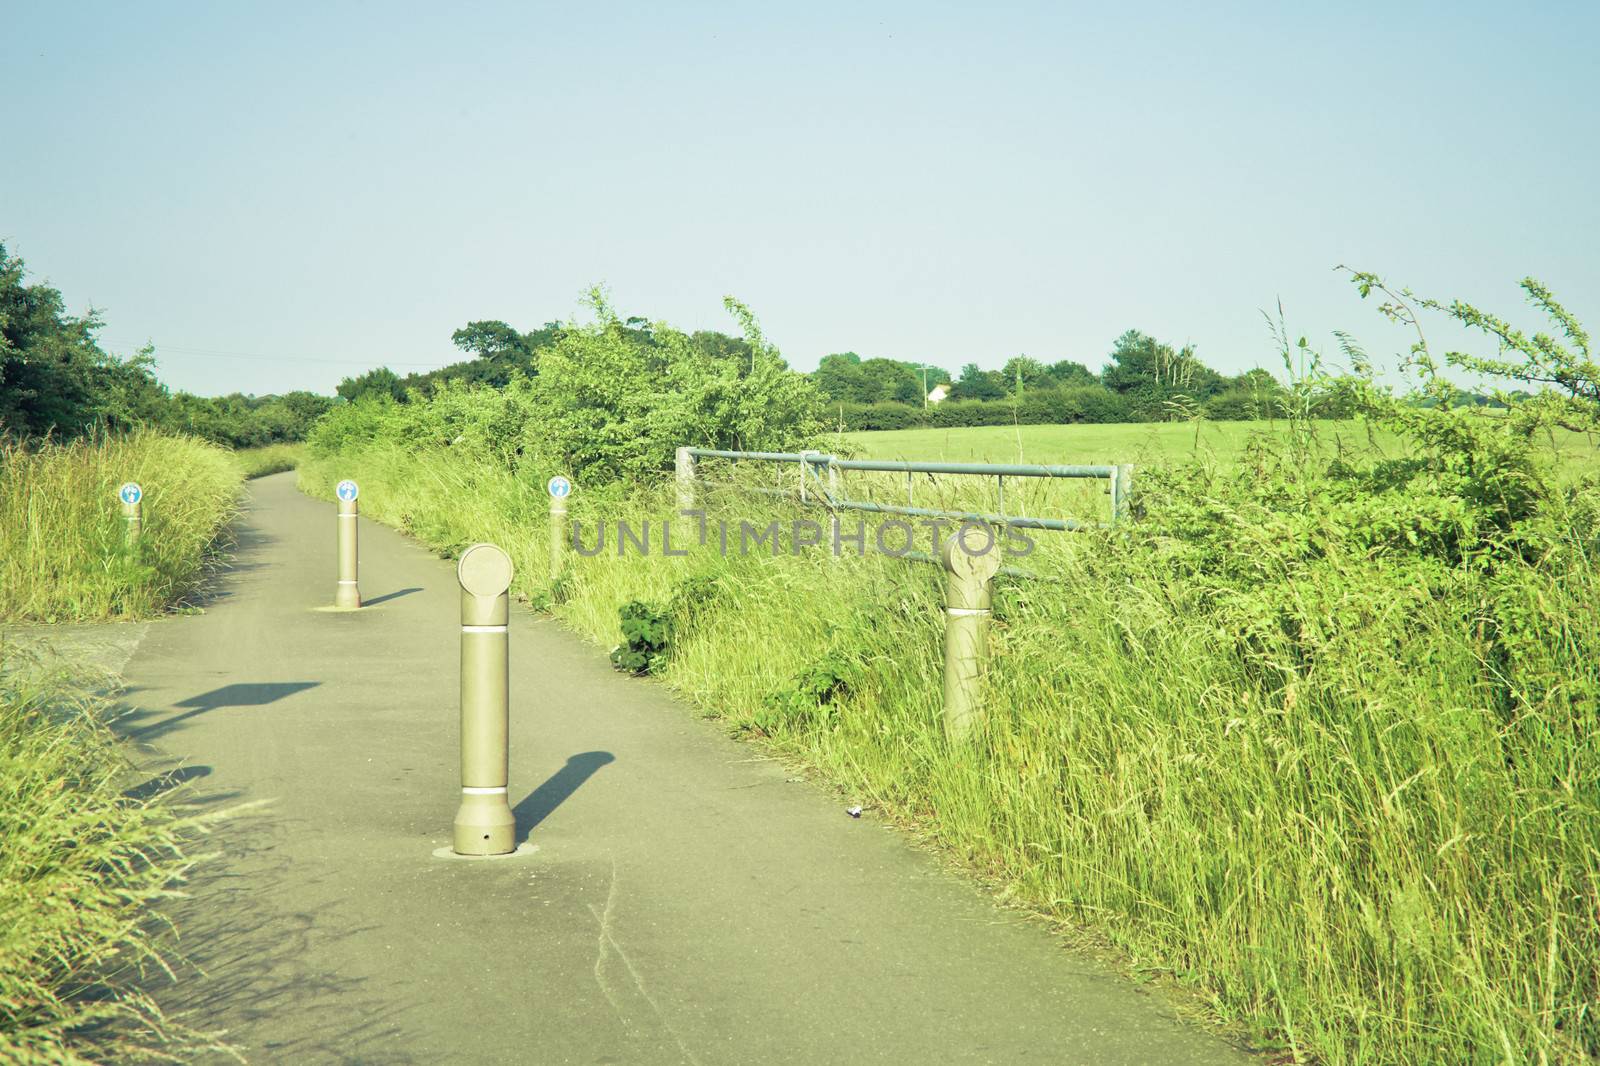 Cycle path adjacent to a field in rural England